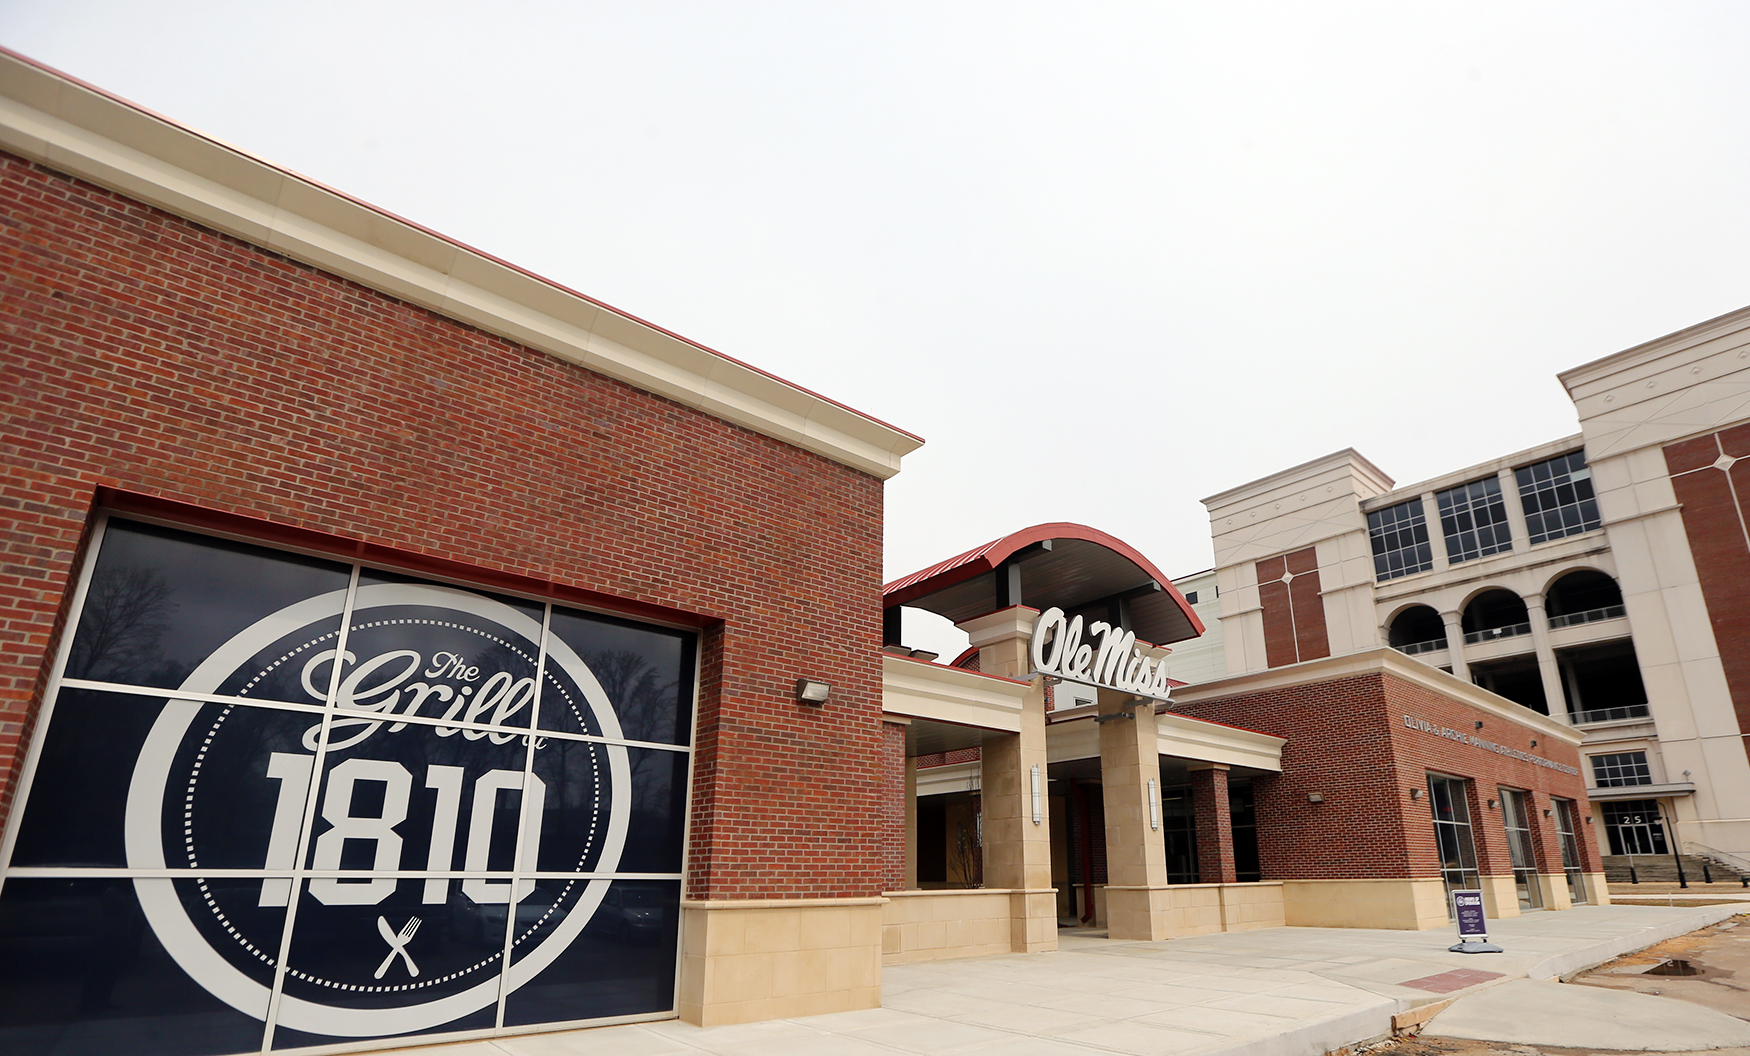 petroleum Udveksle Overveje Score a great meal at the Grill at 1810 - The Daily Mississippian